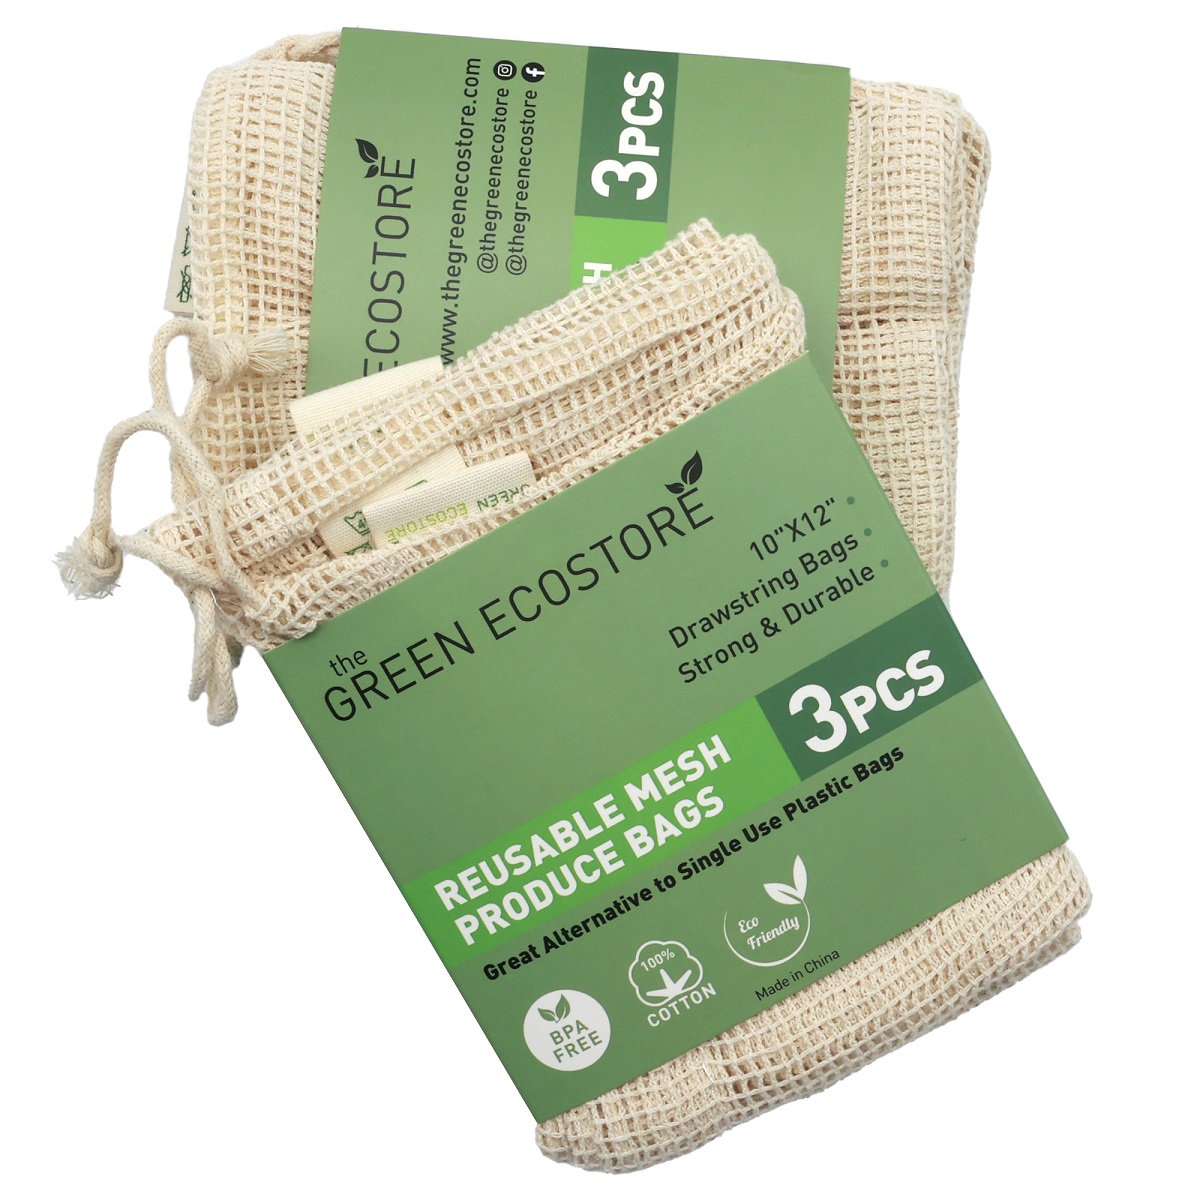 The Green Ecostore Announces The Launch Of Reusable Produce Bags And Totes